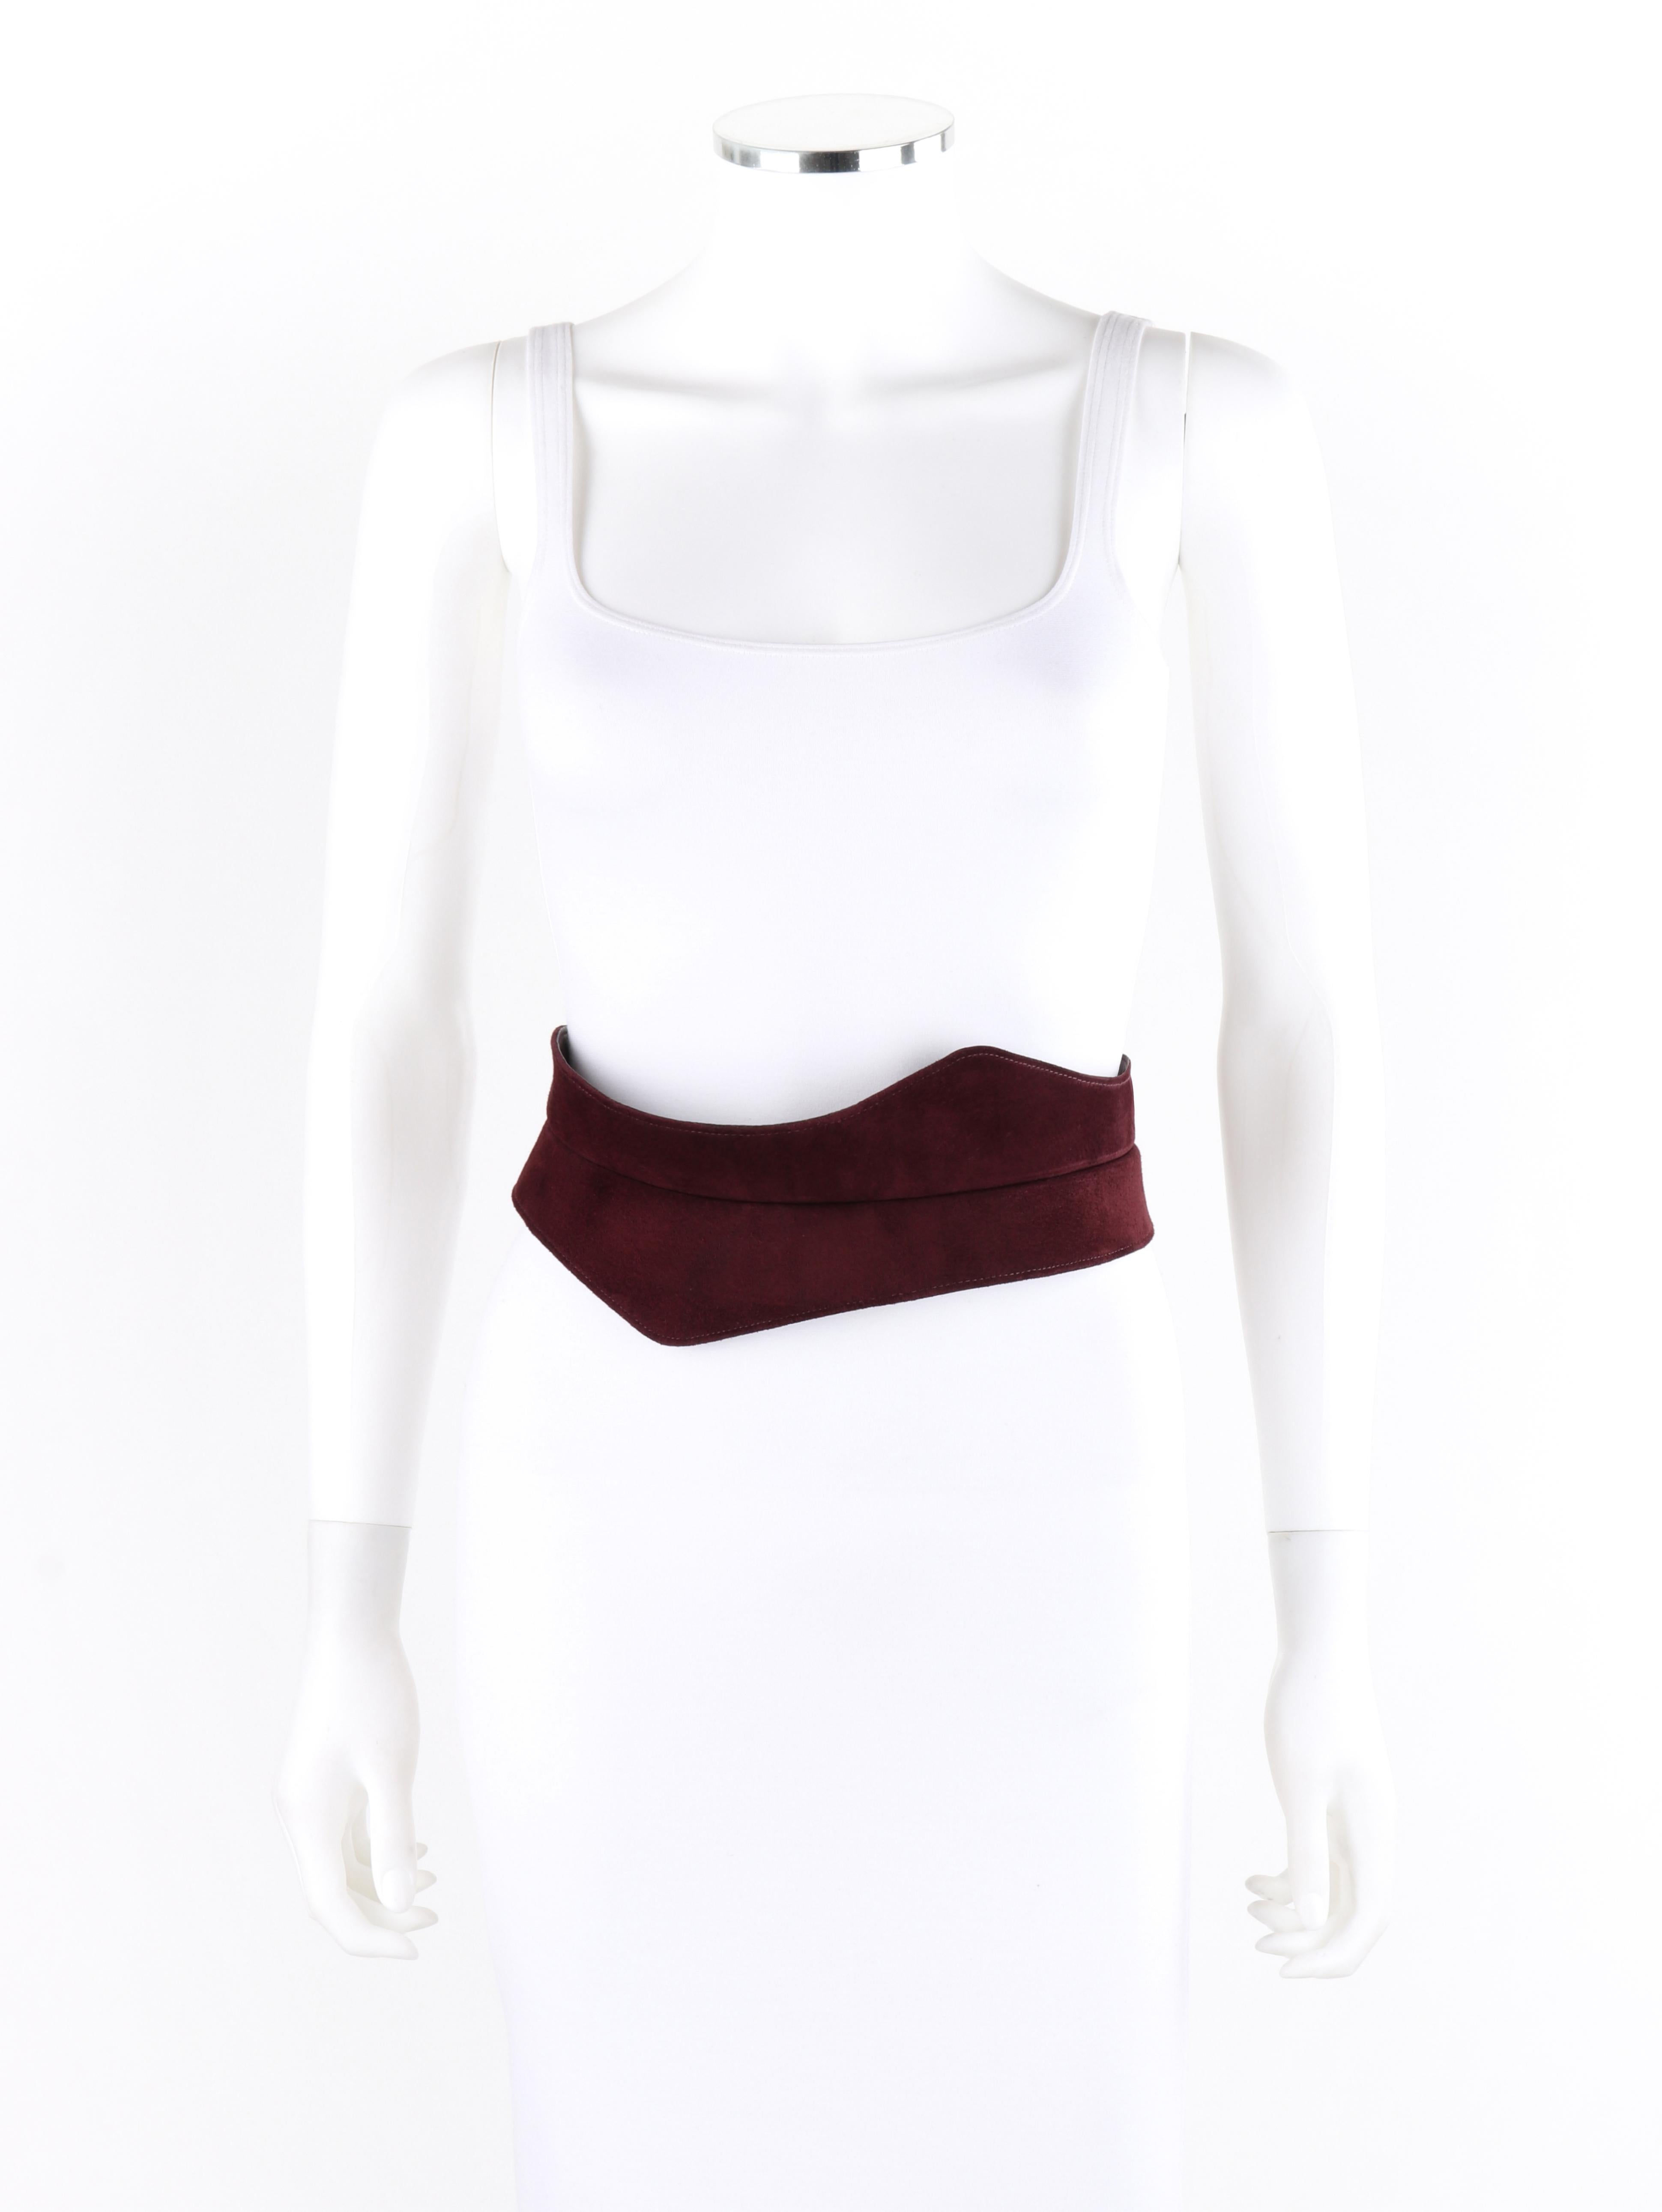 HALSTON c.1970's Burgundy Suede Leather Art Deco Avant Garde Tied Obi Waist Belt
 
Circa: 1970’s
Brand/Manufacturer: Halston
Designer: Roy Halston Frowick
Style: Obi belt
Color(s): Shades of red
Lined: Yes
Unmarked Fabric Content: Suede (exterior);